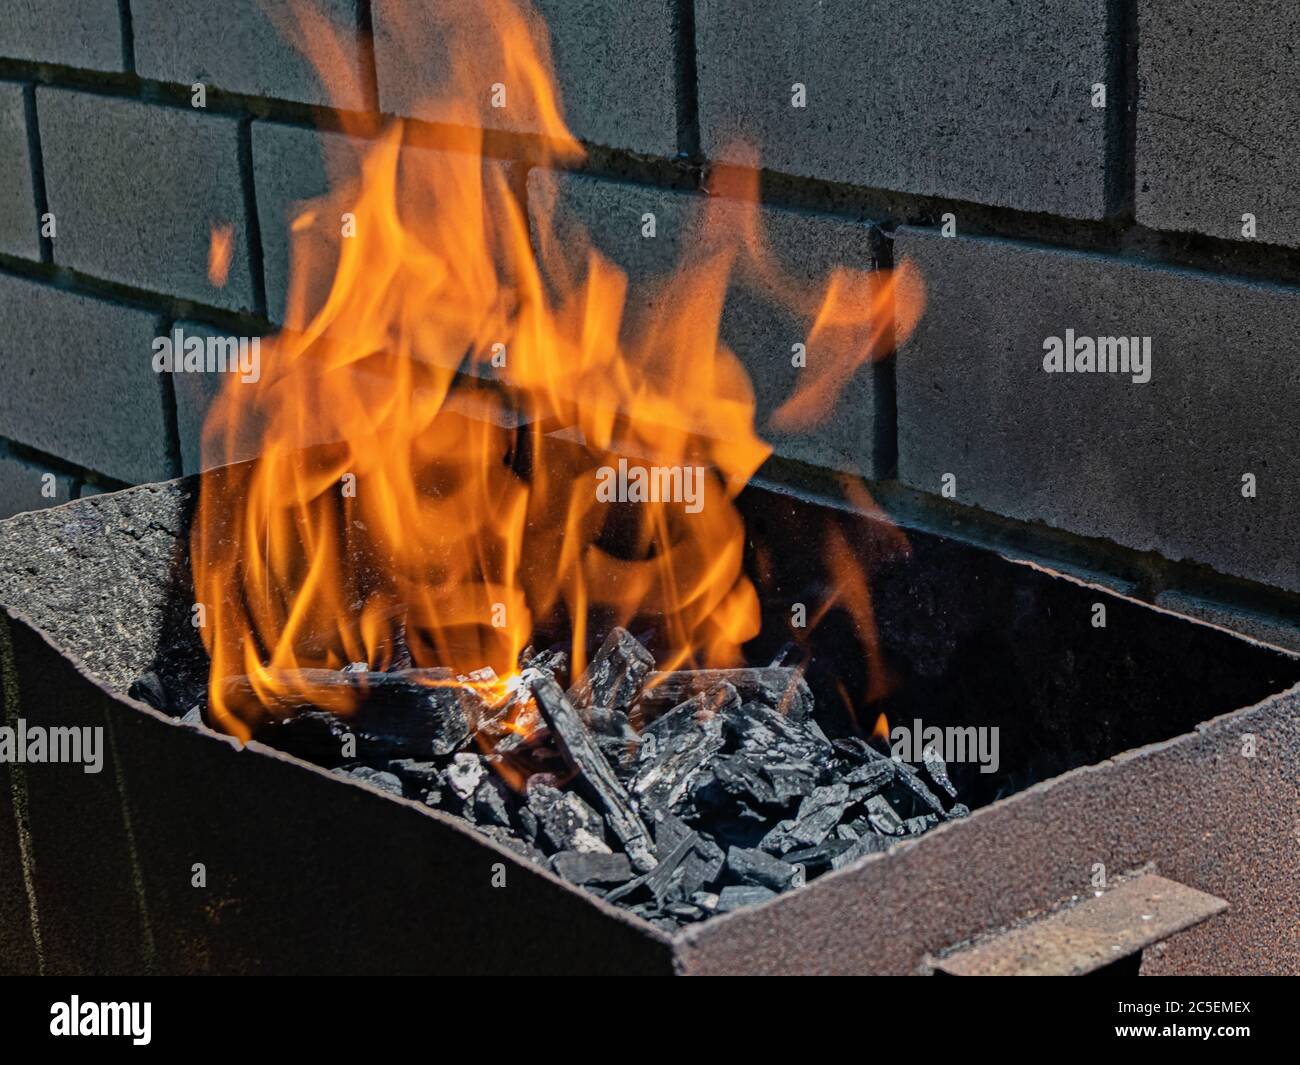 Vibrant Orange Barbecue Flame Over Burning Coals in Anticipation of Making Barbecue Stock Photo